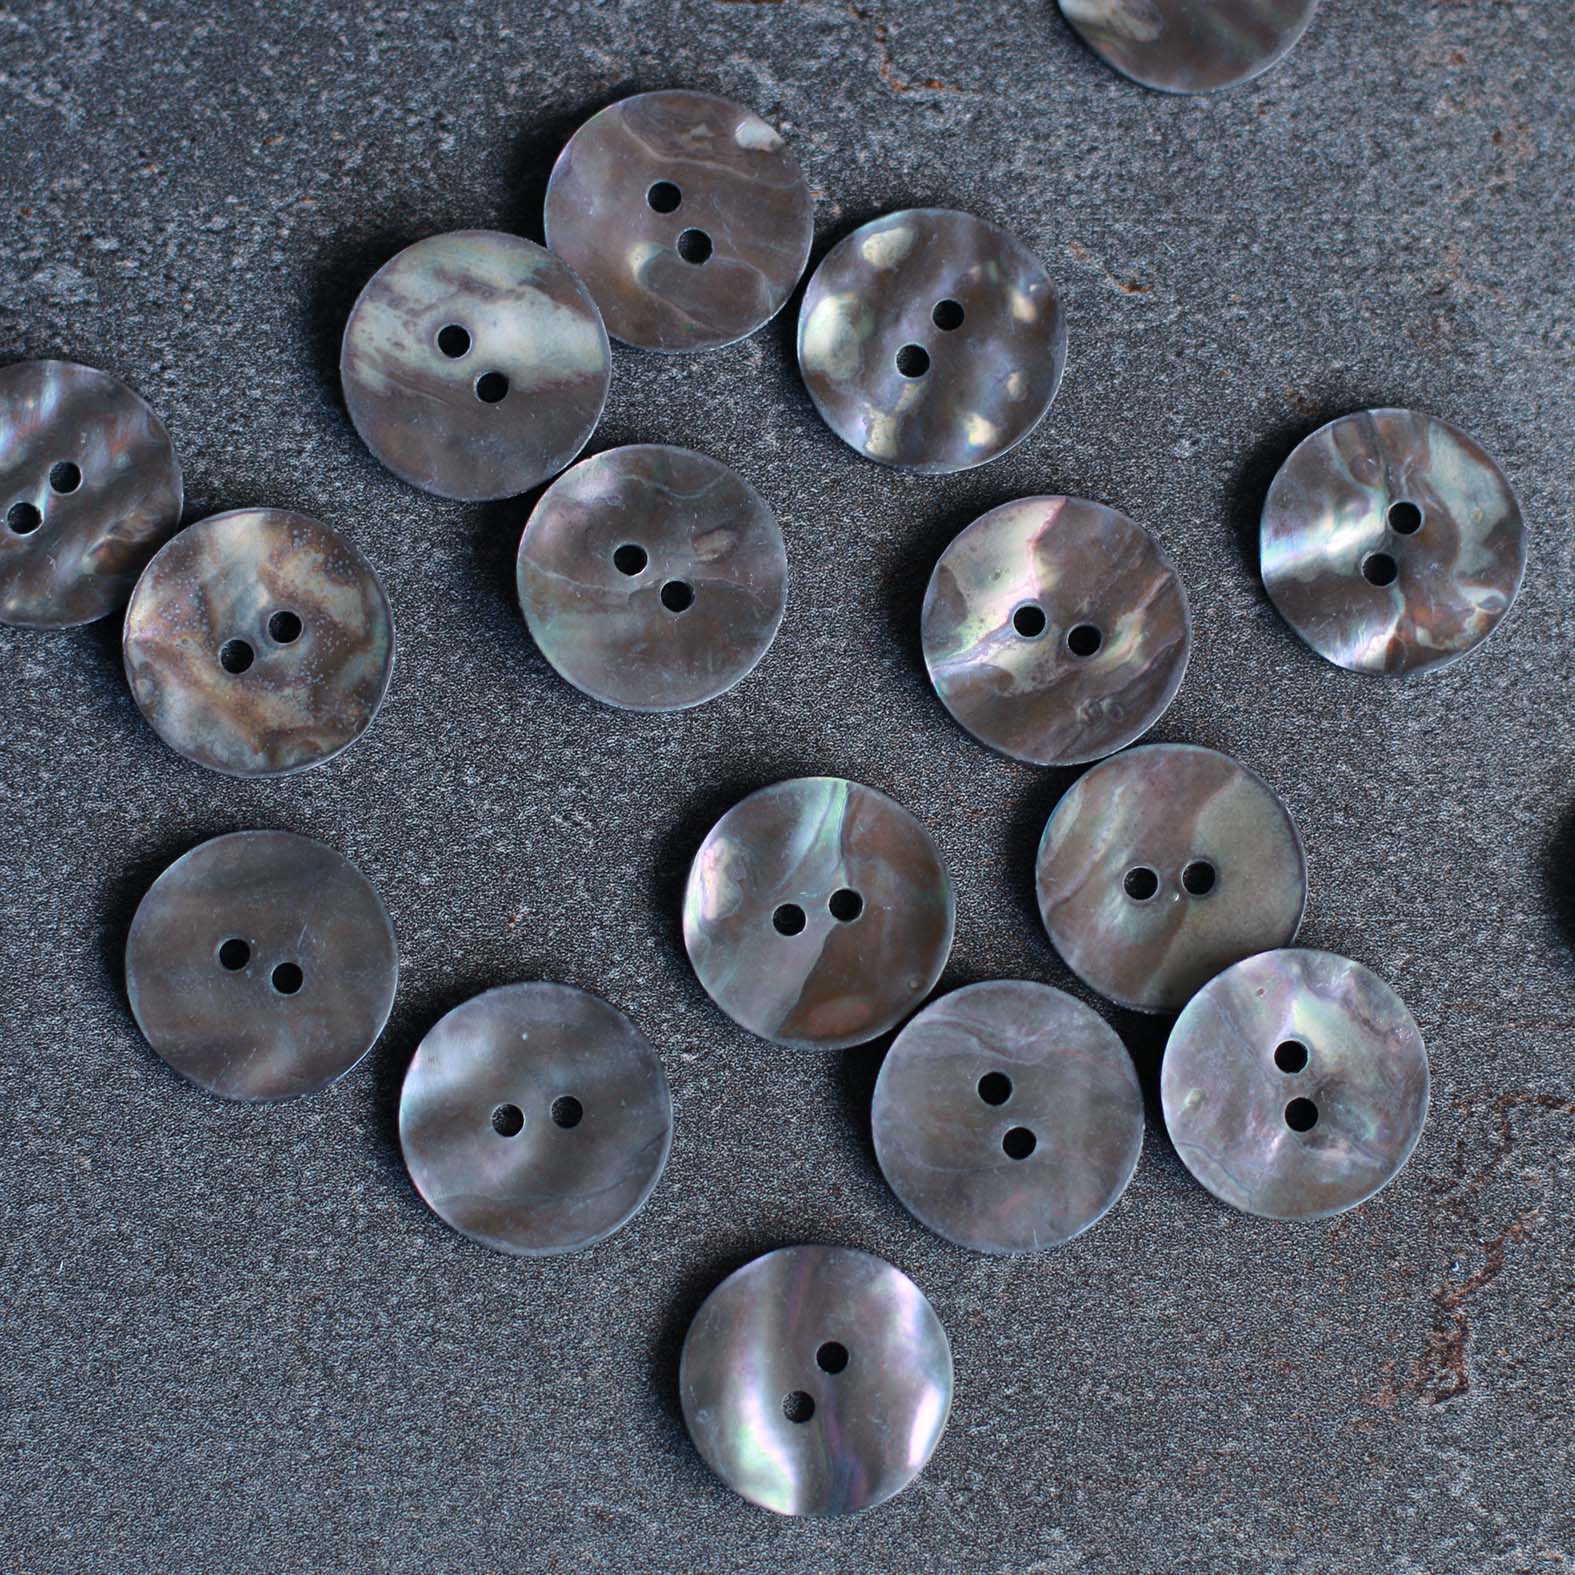 22mm Mother of Pearl Button - Dark